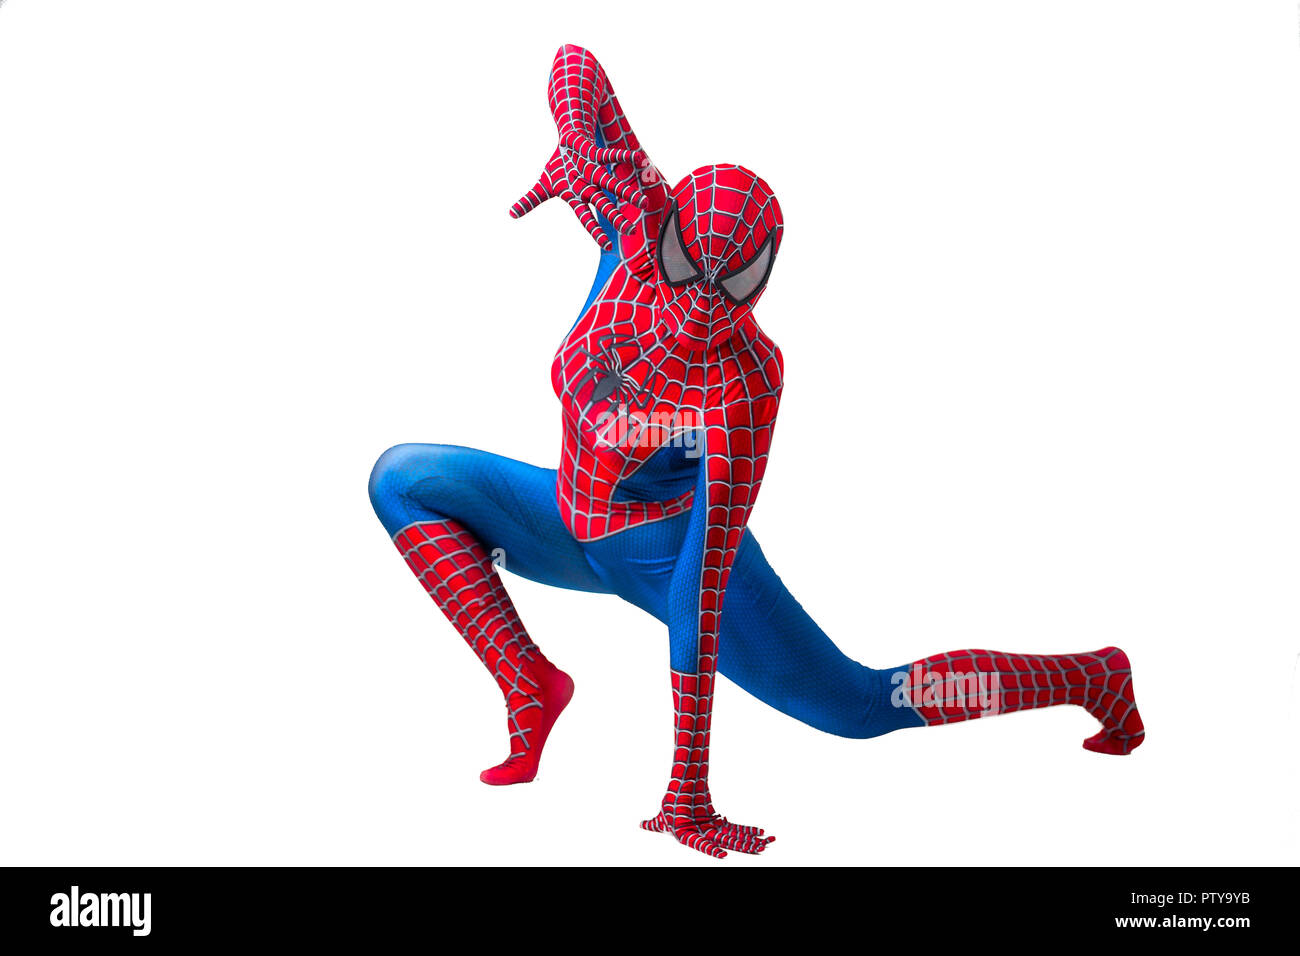 Central, Hong Kong - 19 August 2018: A man cosplaying the famous Marvel comic character - Spiderman and posing to take pictures. Stock Photo